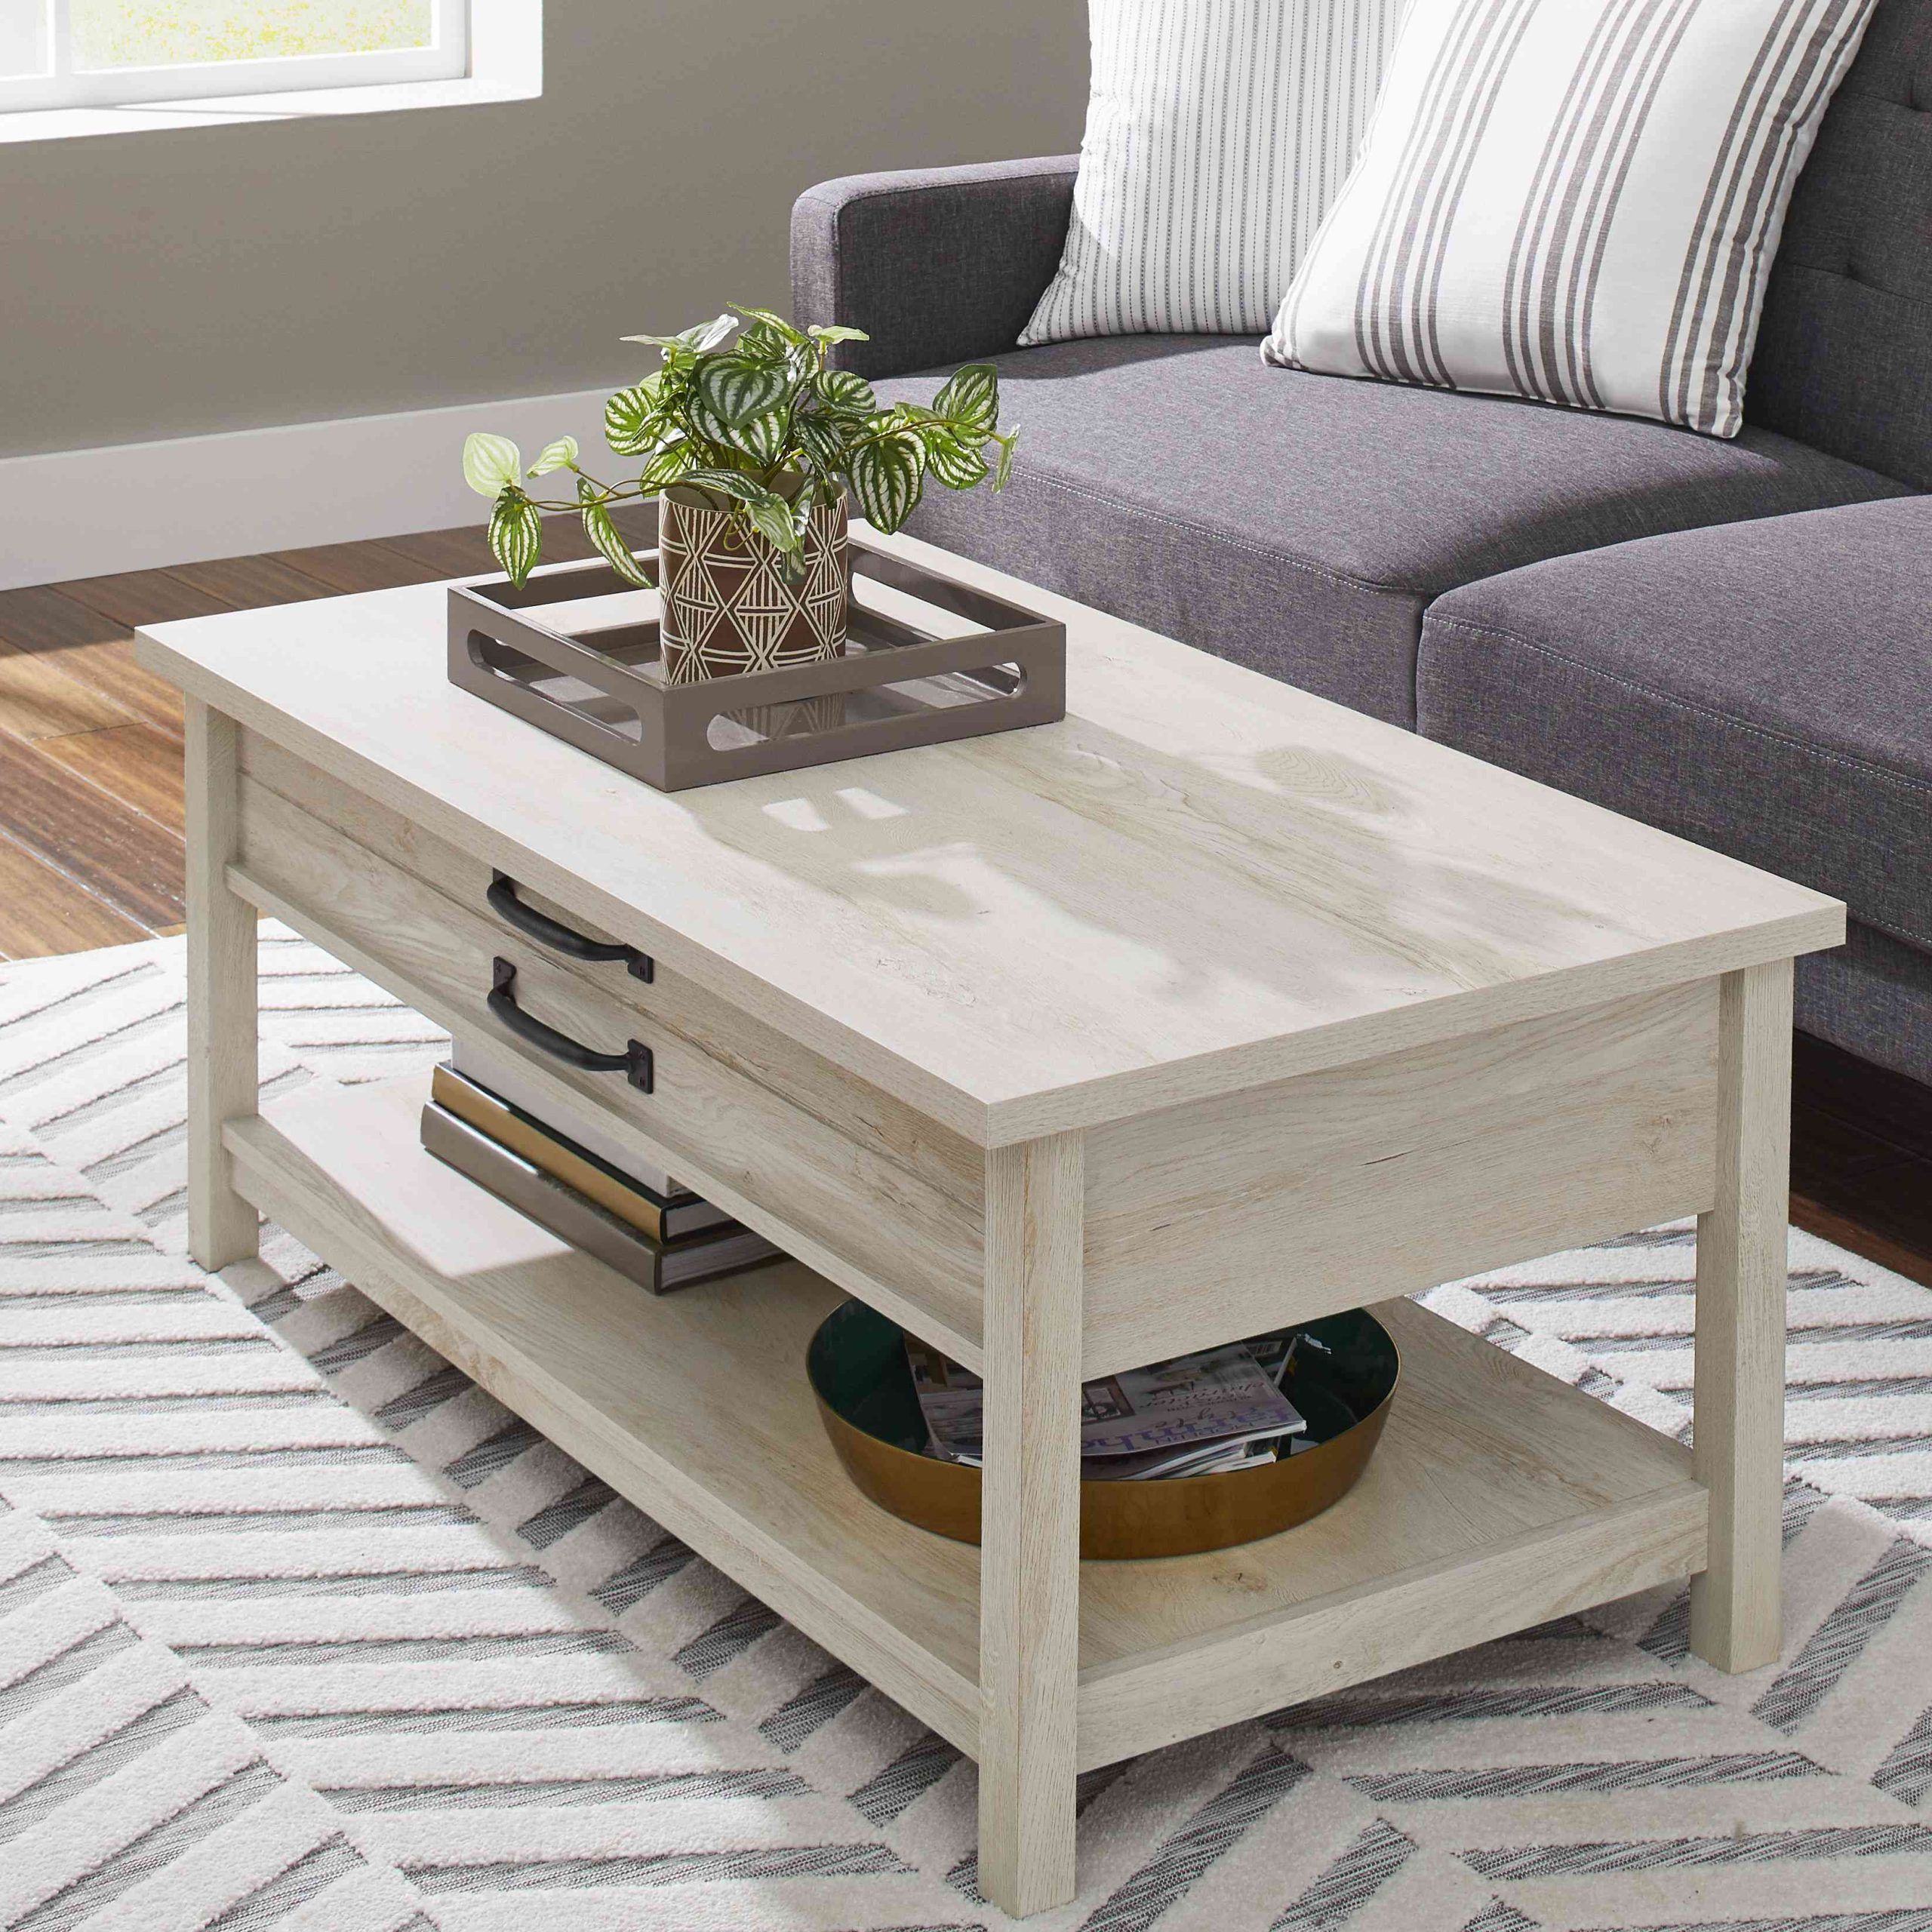 The 9 Best Lift Top Coffee Tables Of 2022 Regarding Lift Top Coffee Tables With Storage (View 13 of 15)